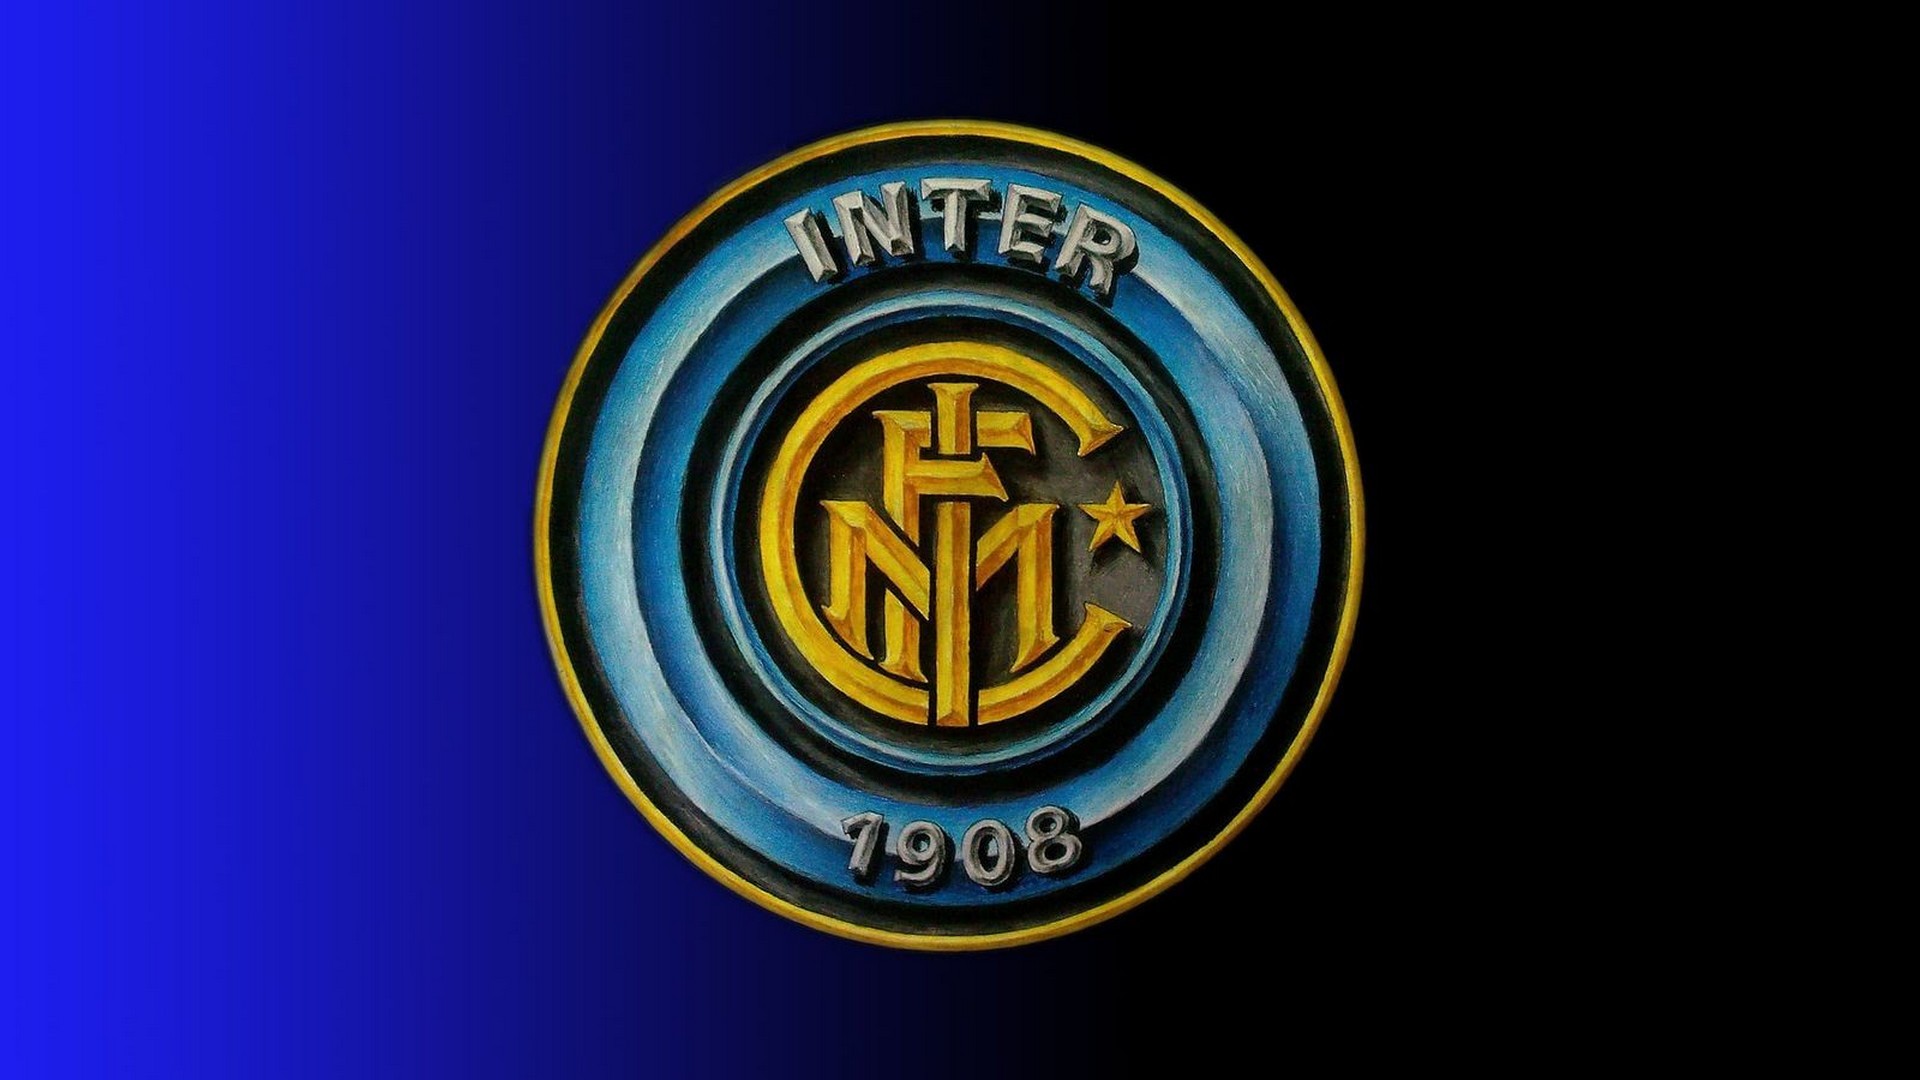 Inter Milan For PC Wallpaper with high-resolution 1920x1080 pixel. You can use this wallpaper for your Desktop Computers, Mac Screensavers, Windows Backgrounds, iPhone Wallpapers, Tablet or Android Lock screen and another Mobile device